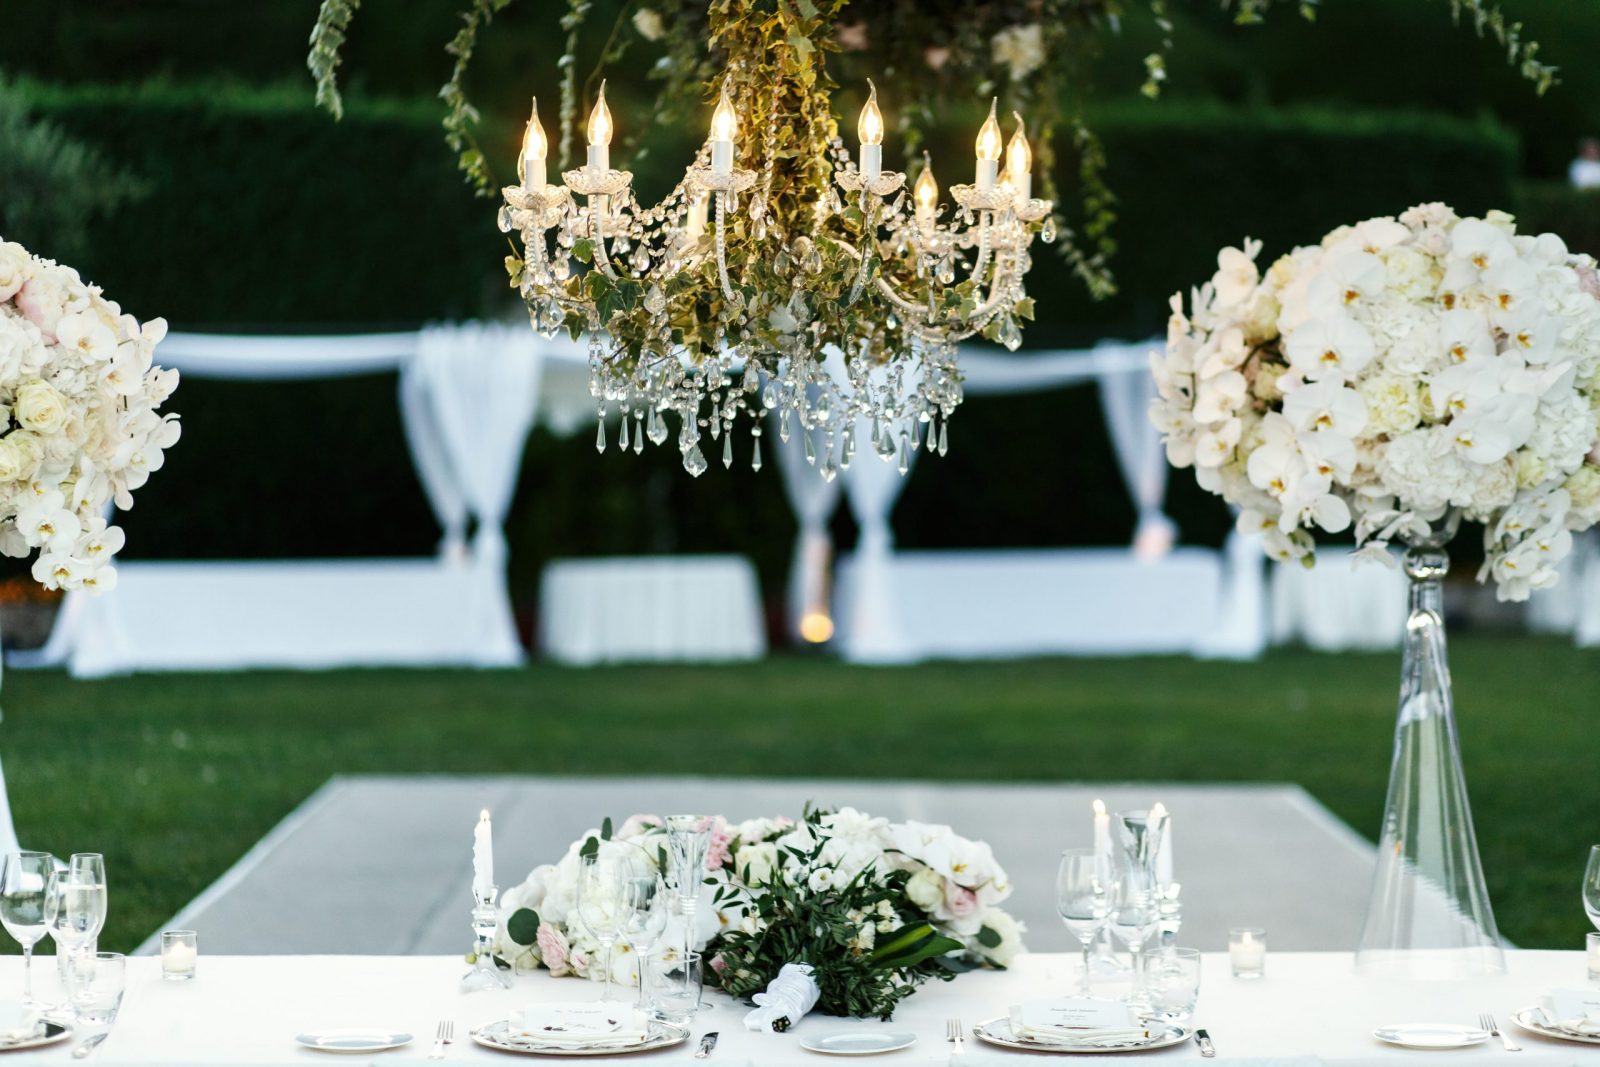 Chandelier with flowers and greenery hangs over dinner table for newlyweds